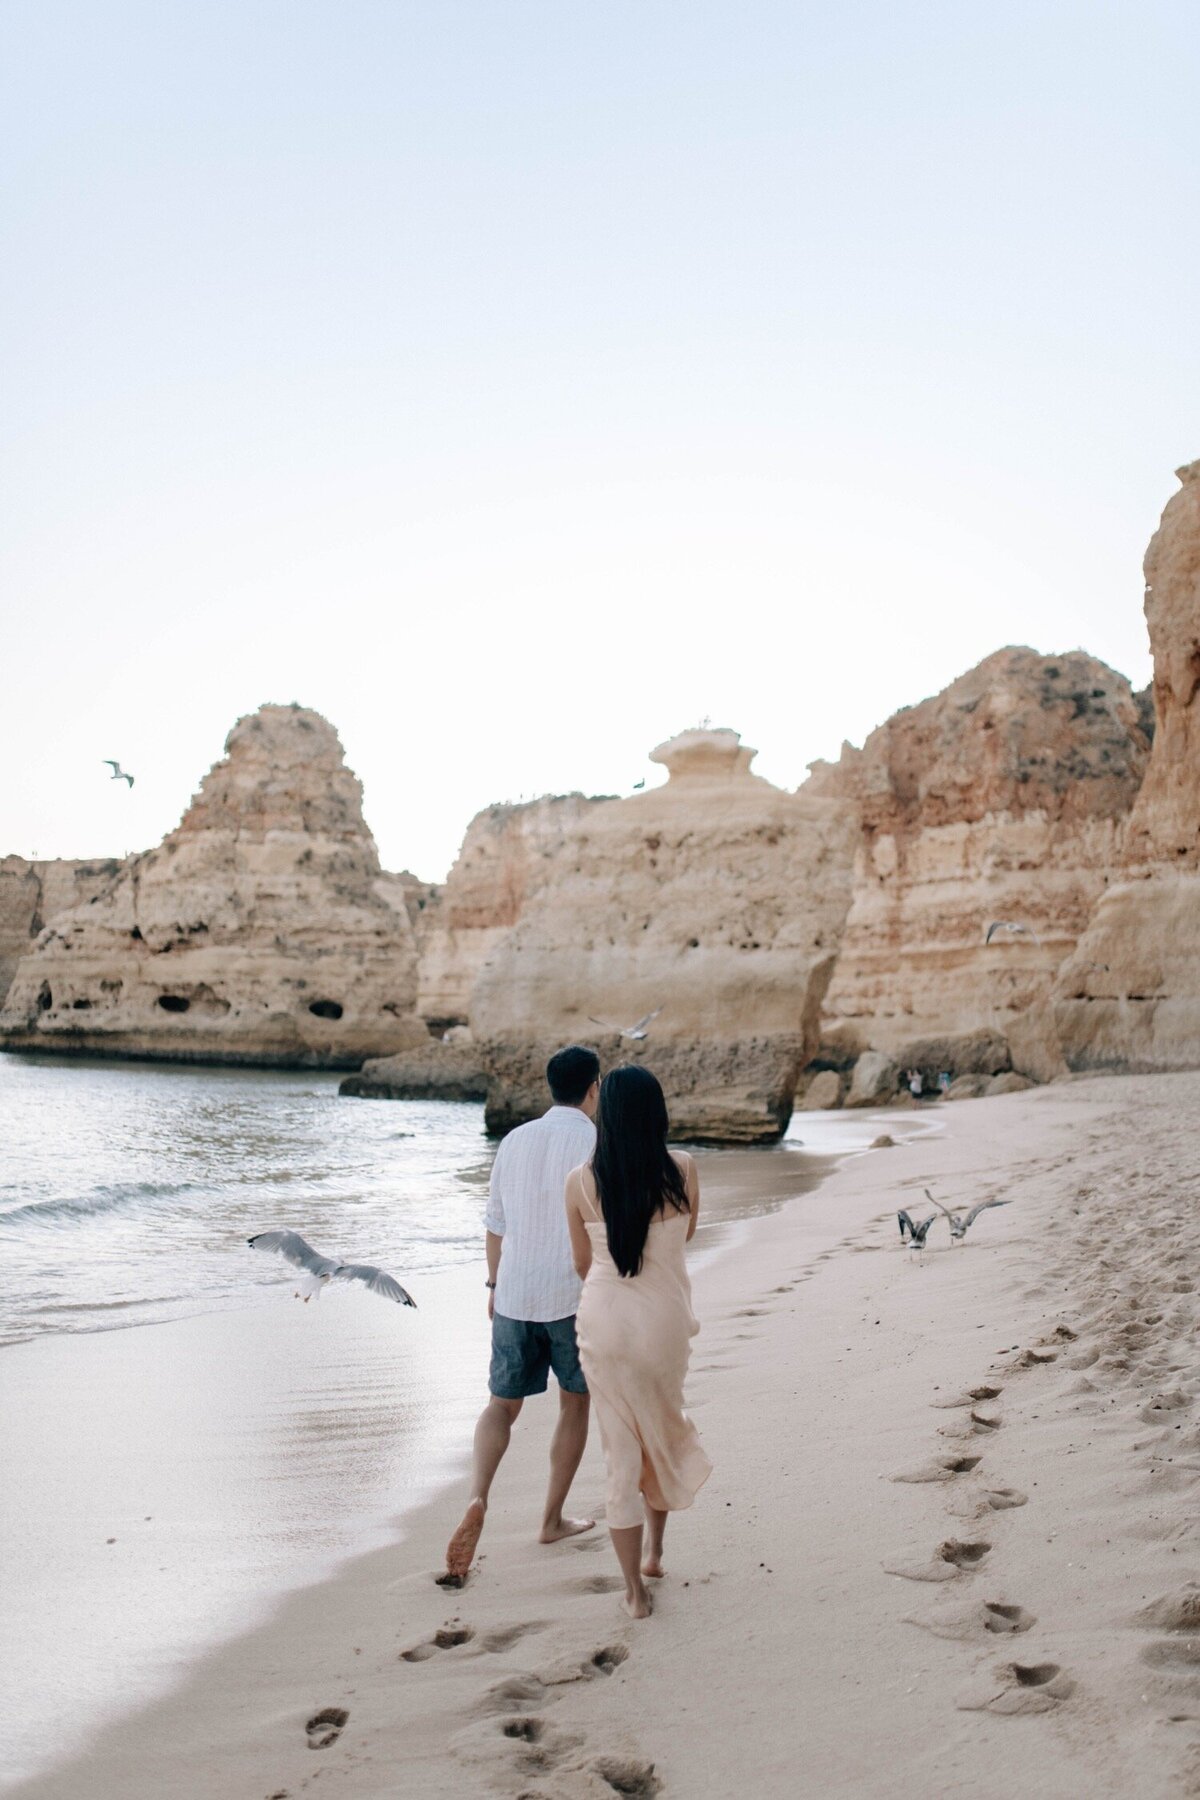 16_Flora_And_Grace_Portugal_Editorial_Wedding_Photographer Lisboa_Wedding_Photographer-126_Natural editorial wedding photographer at the Algarve coast in Portugal. Discover the wedding photography of Flora and Grace.